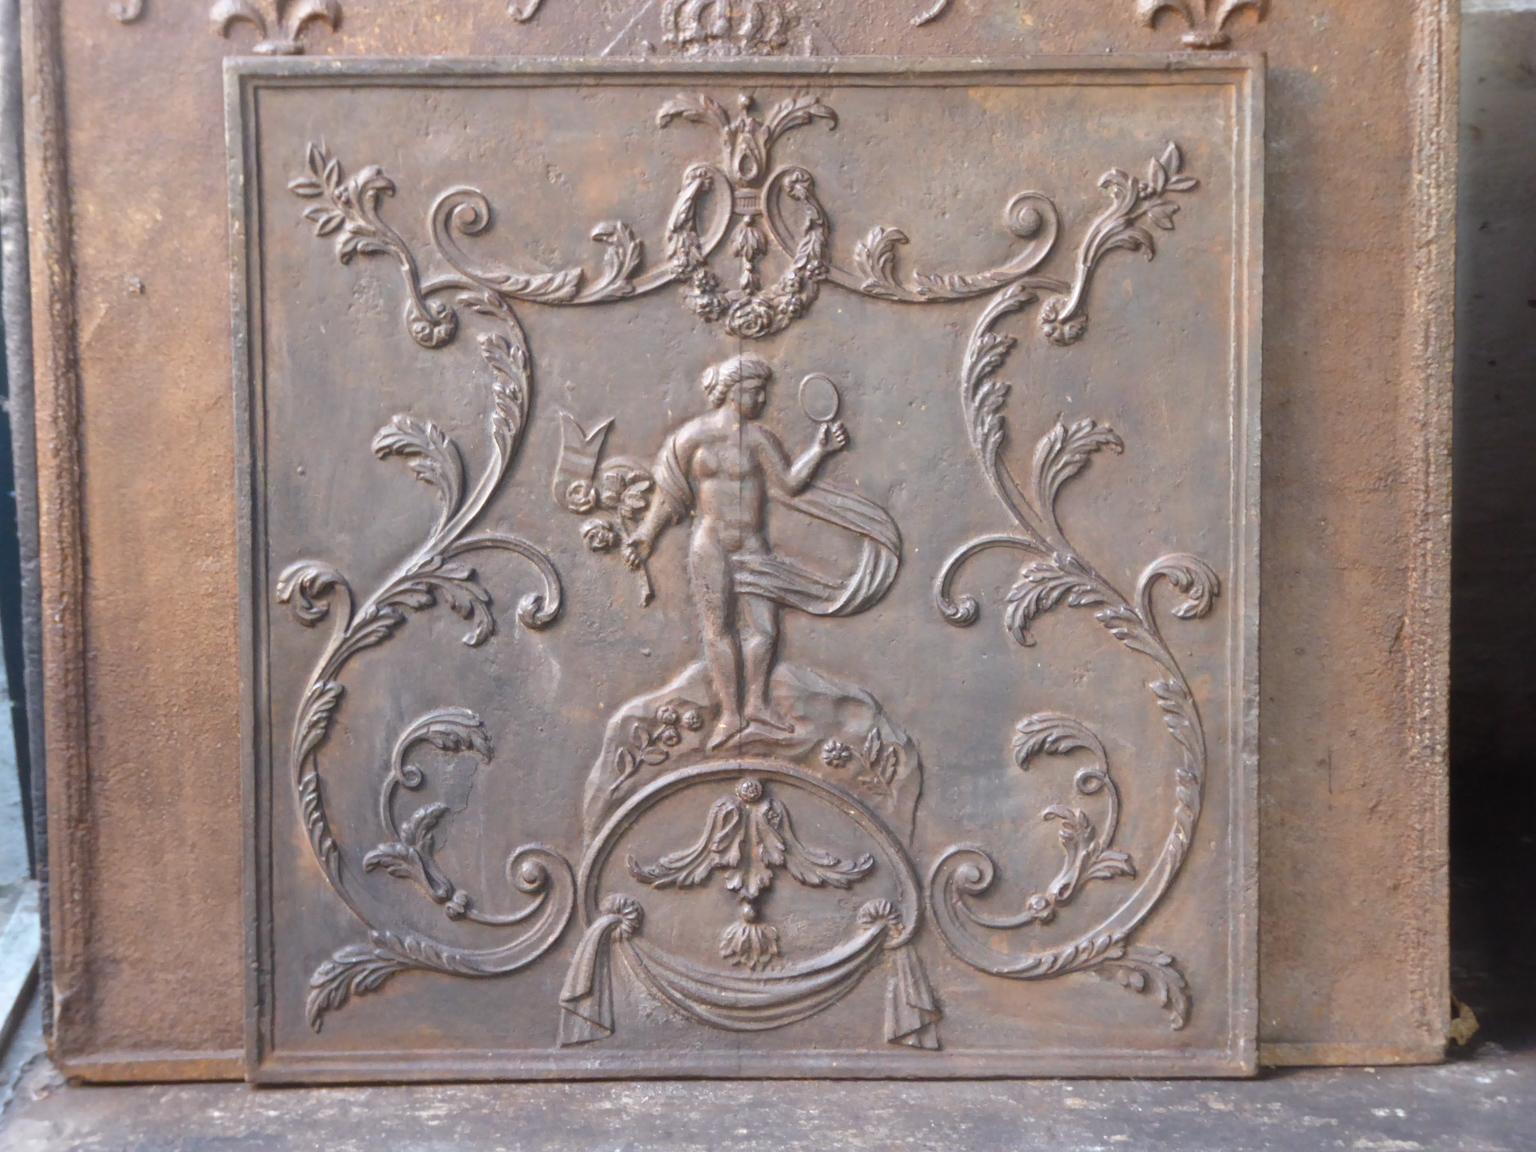 Late 18th or early 19th century French fire back with Venus. Venus with her mirror and torch of Hestia. Goddess of love, beauty and fertility. The torch is the symbol of Hestia, goddess of fire and more specifically the domestic hearth. Where no